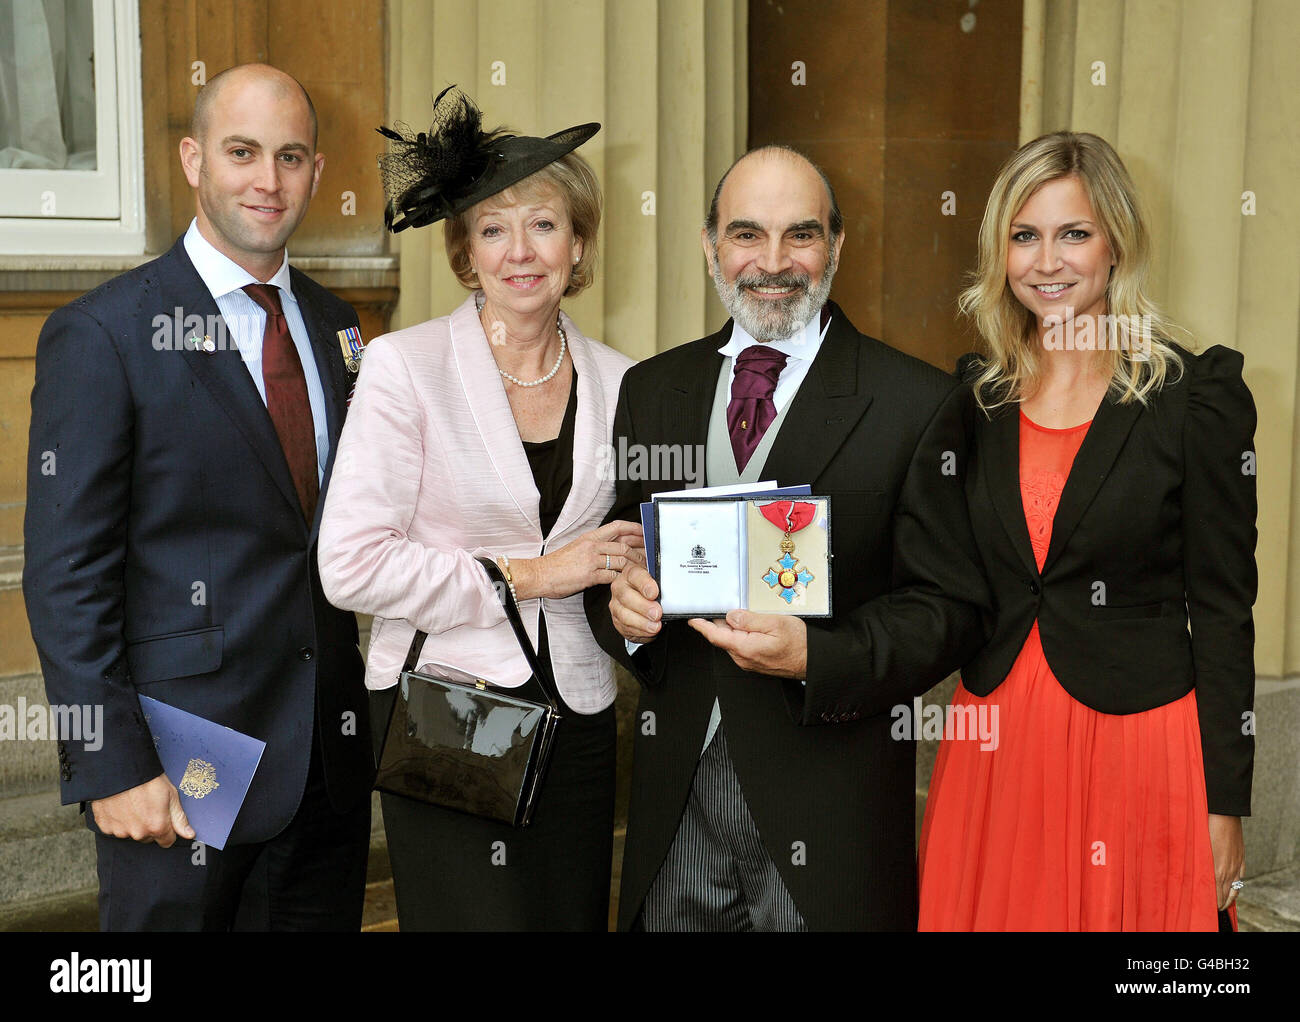 Actor David Suchet (2nd right) with son Robert (left), wife Sheila (2nd left), and daughter Katherine (right), as he proudly holds his CBE after it was presented to him by the Prince of Wales at the Investiture Ceremony in Buckingham Palace in central London. Stock Photo